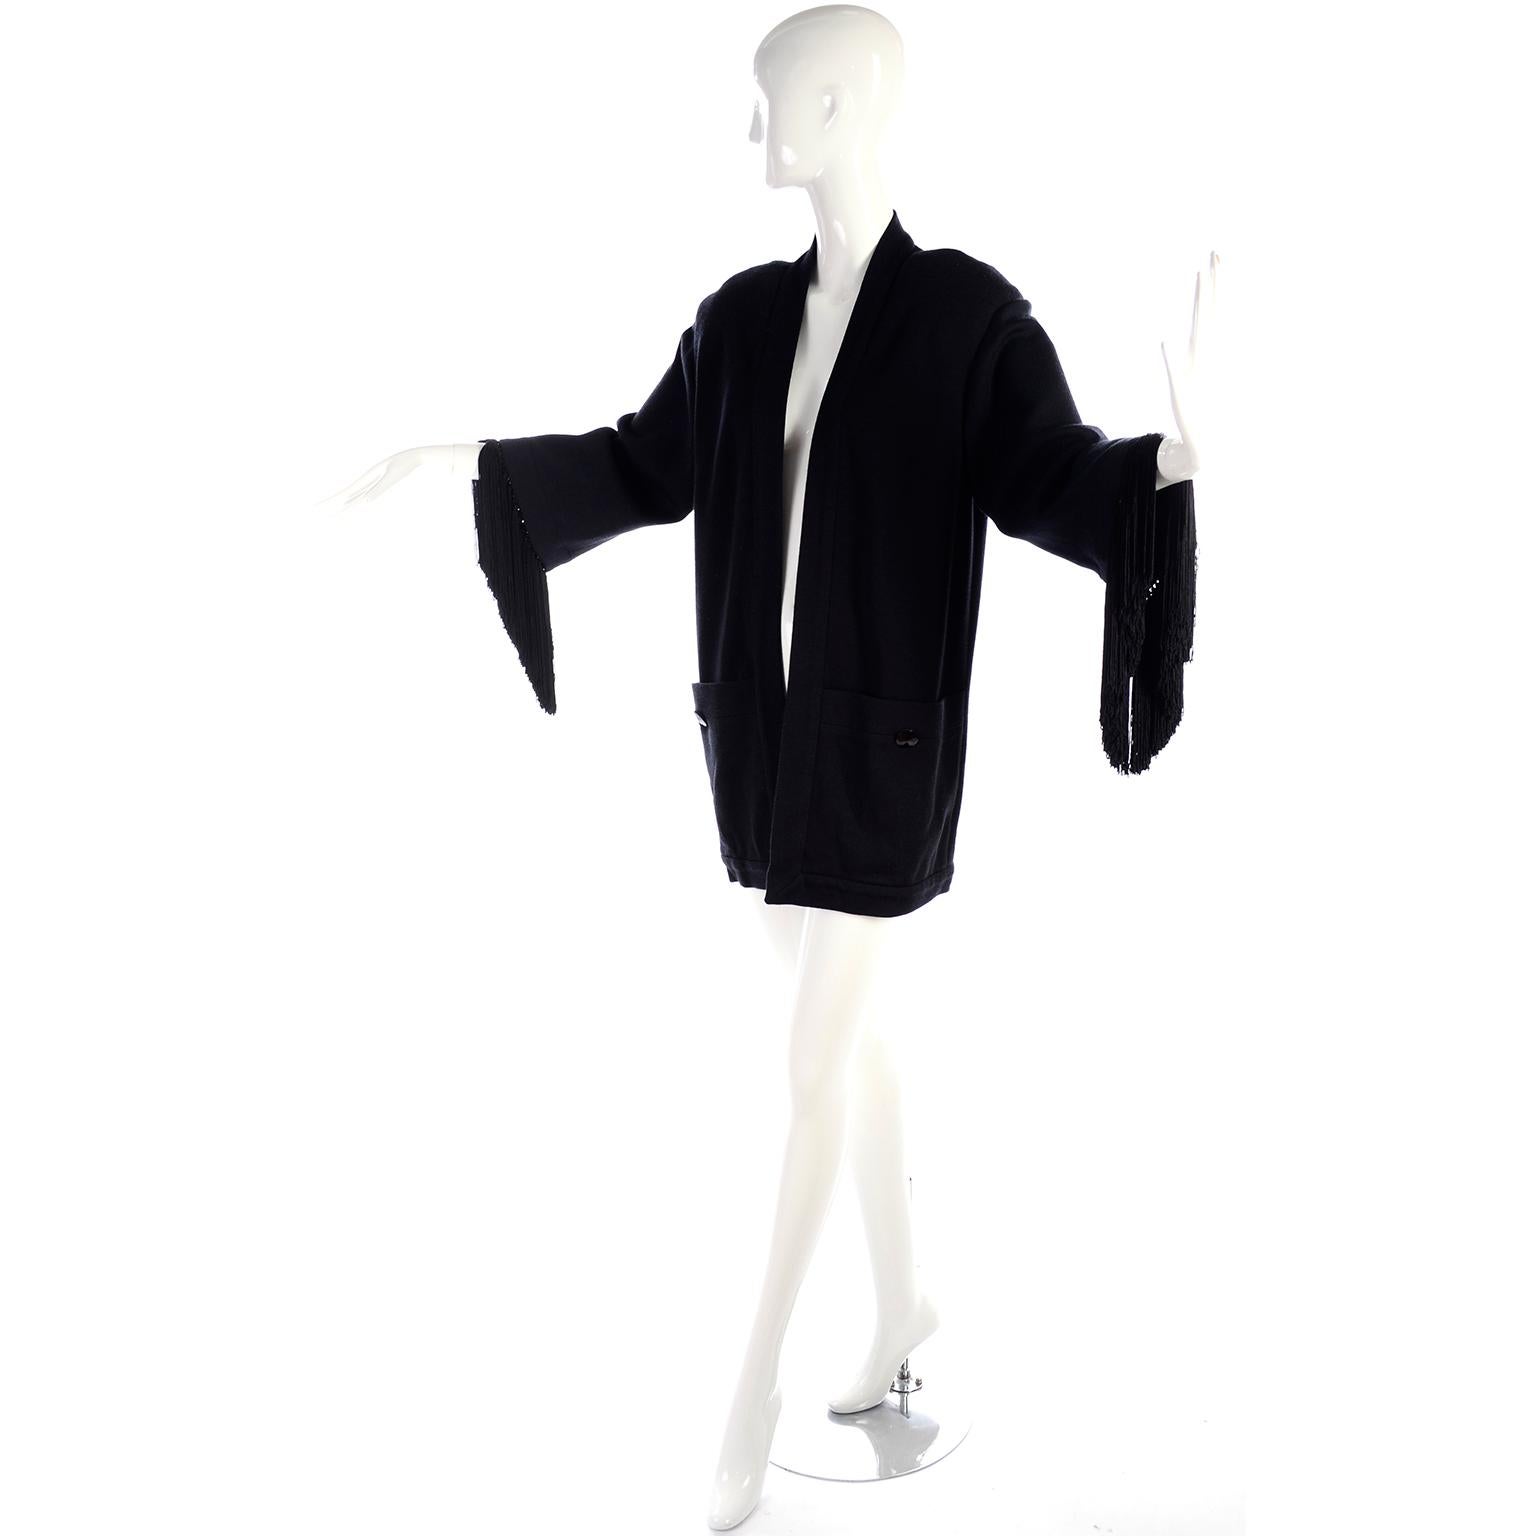 Nina Ricci Haute Boutique Black Wool Open front cardigan style jacket with fringed cuffs. There are shoulder pads (can be removed), front pockets with faceted black glass buttons and the jacket was made in France.  A beautiful piece that is